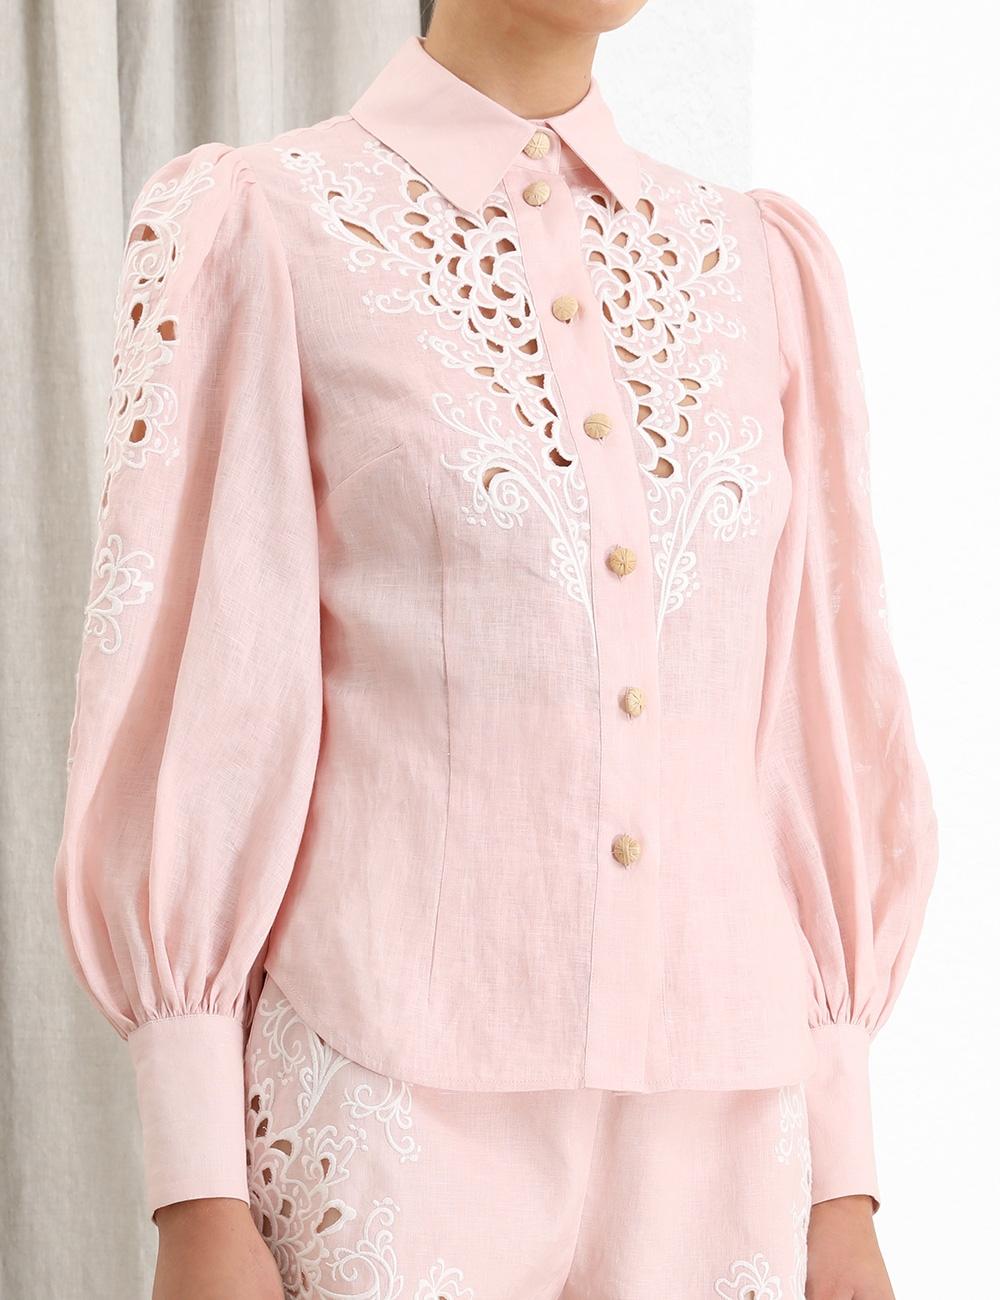 Zimmermann Freja Embroidery Shirt in Blossom (Pink) | Lyst